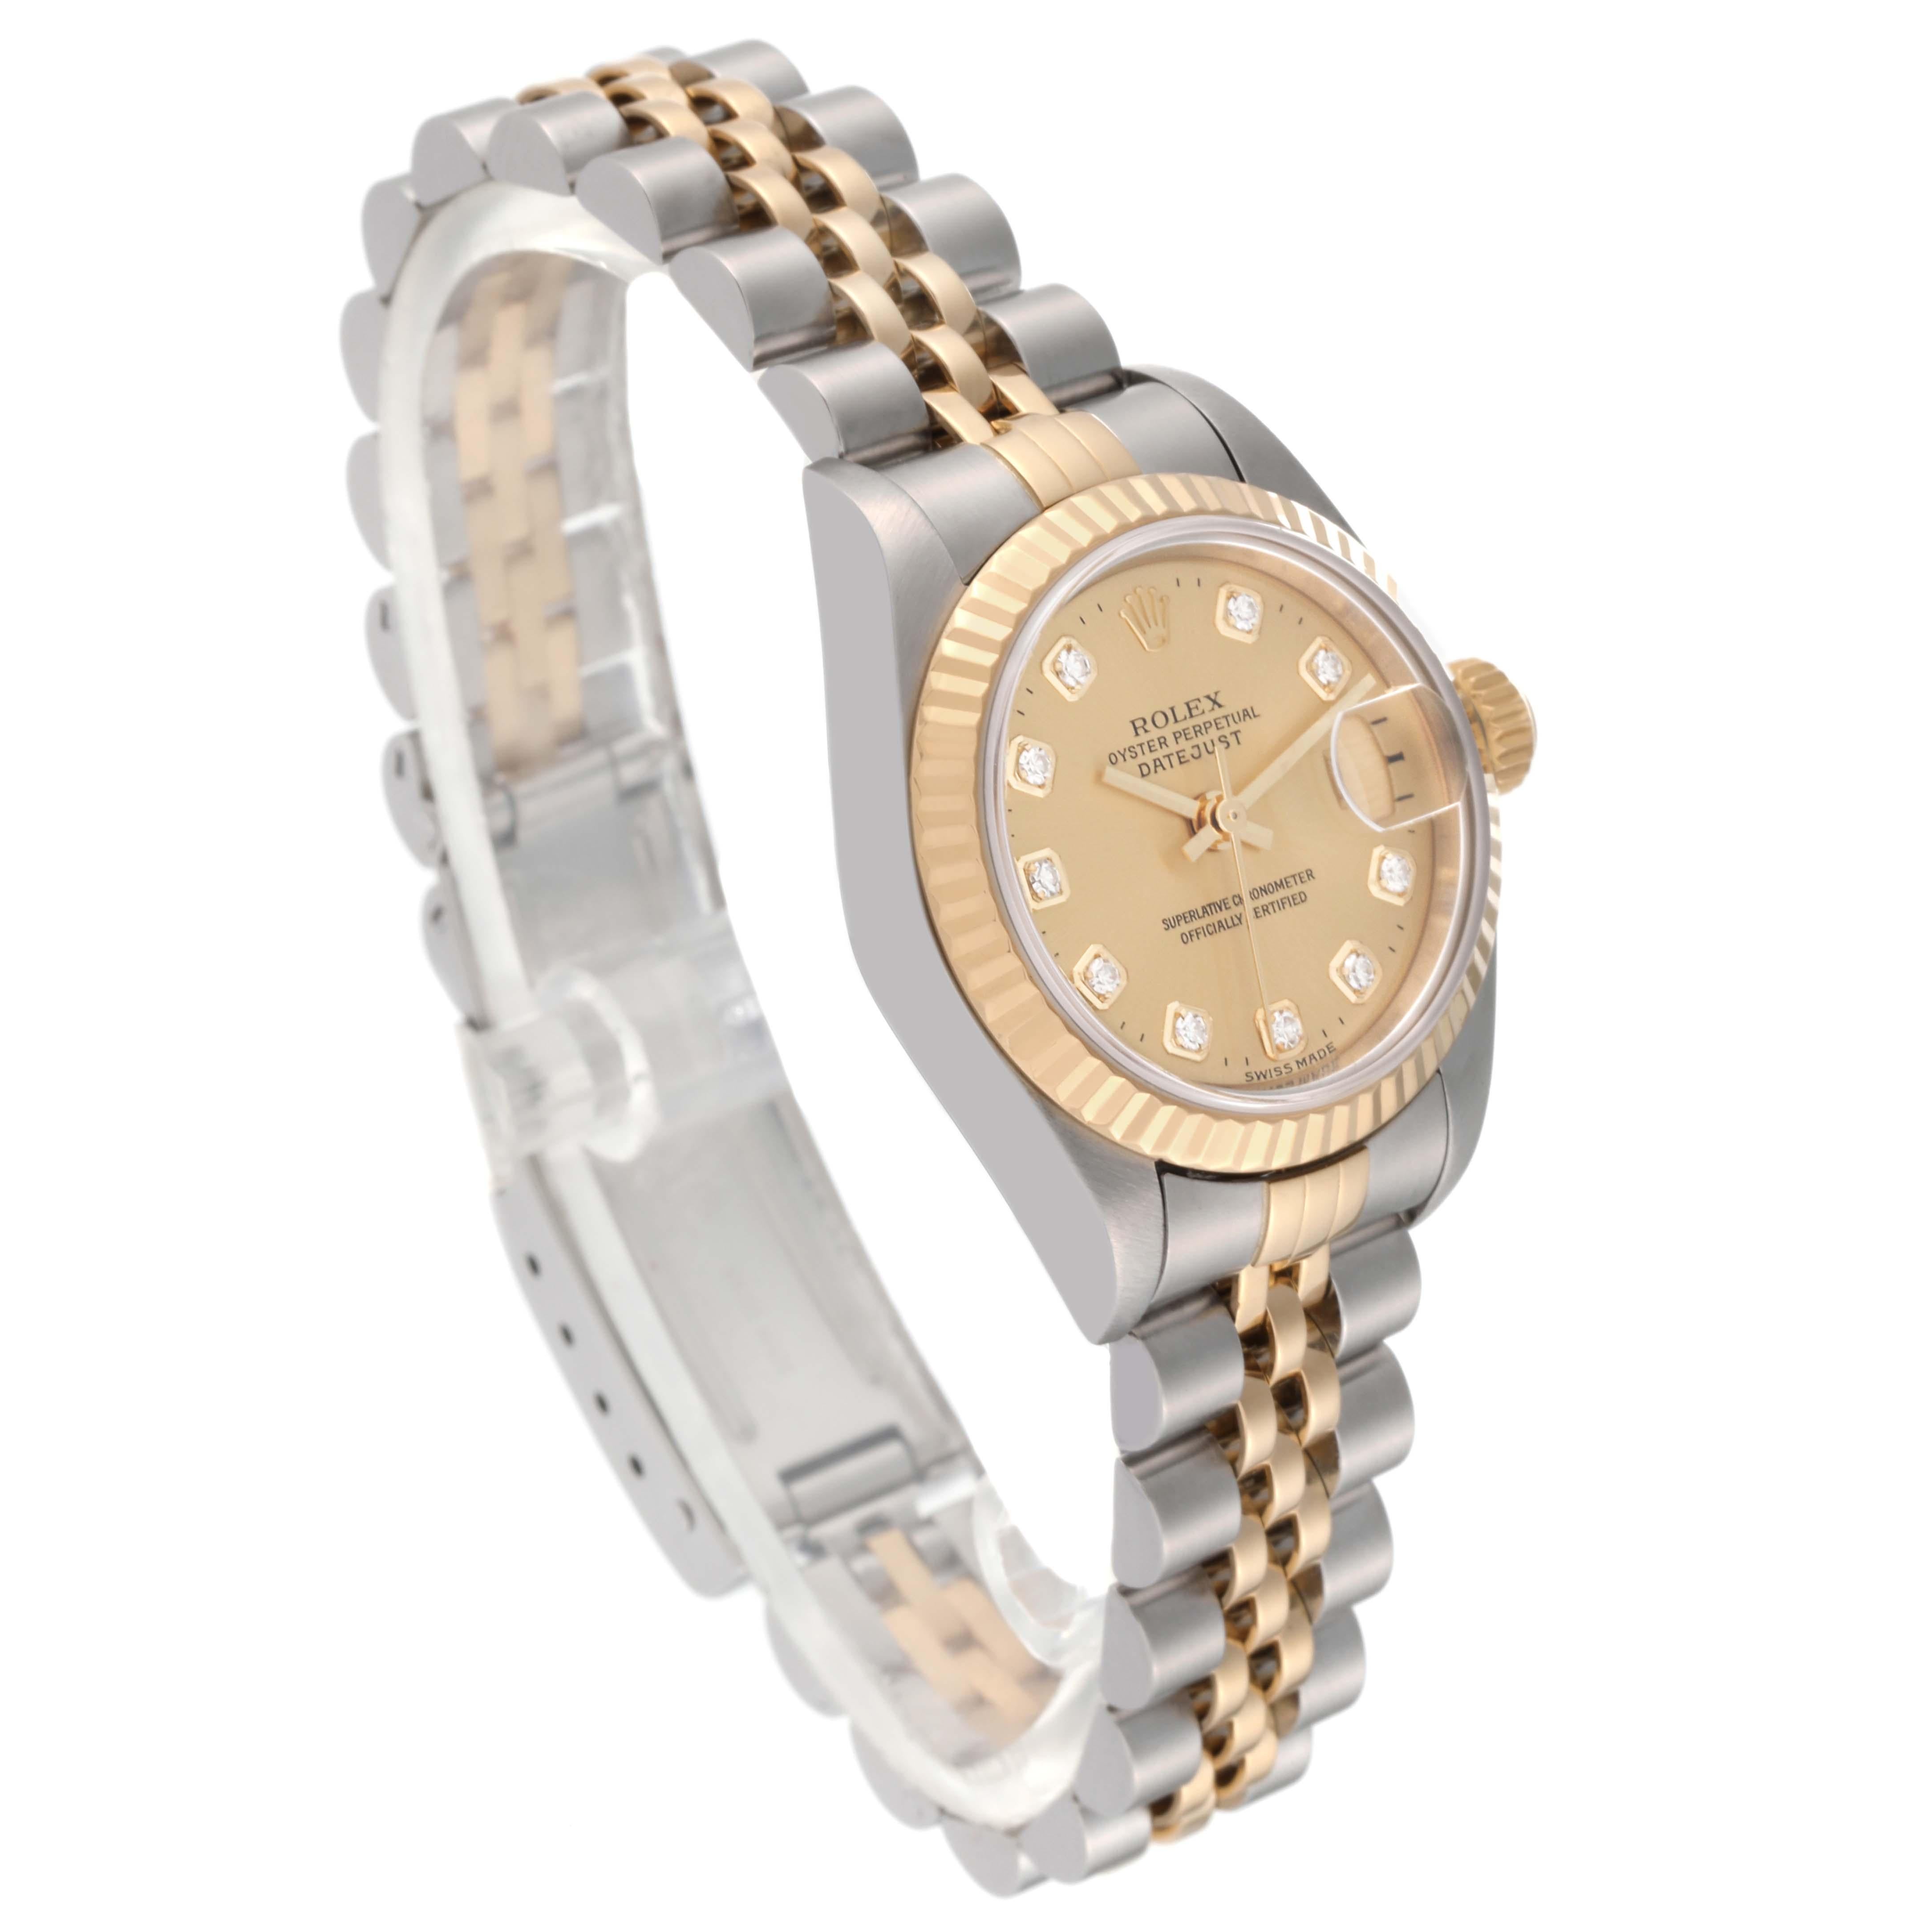 Rolex Datejust Steel Yellow Gold Champagne Diamond Dial Ladies Watch 79173. Officially certified chronometer automatic self-winding movement. Stainless steel oyster case 26.0 mm in diameter. Rolex logo on an 18K yellow gold crown. 18k yellow gold